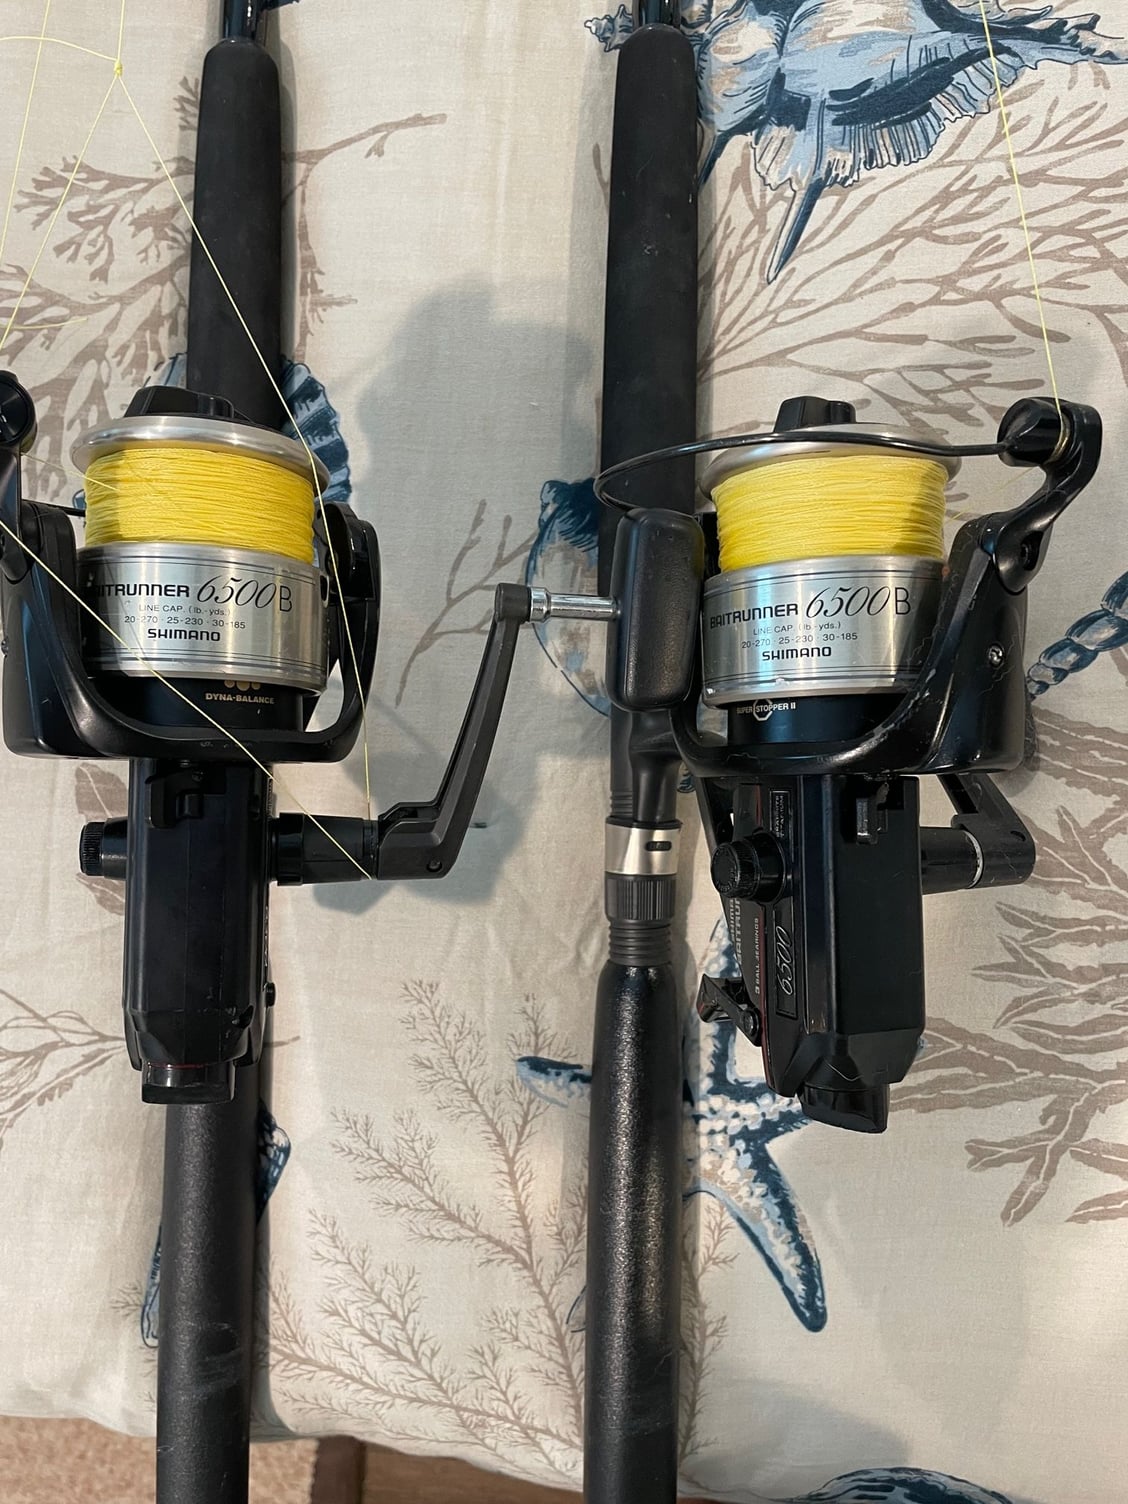 shimano baitrunner 6500 products for sale